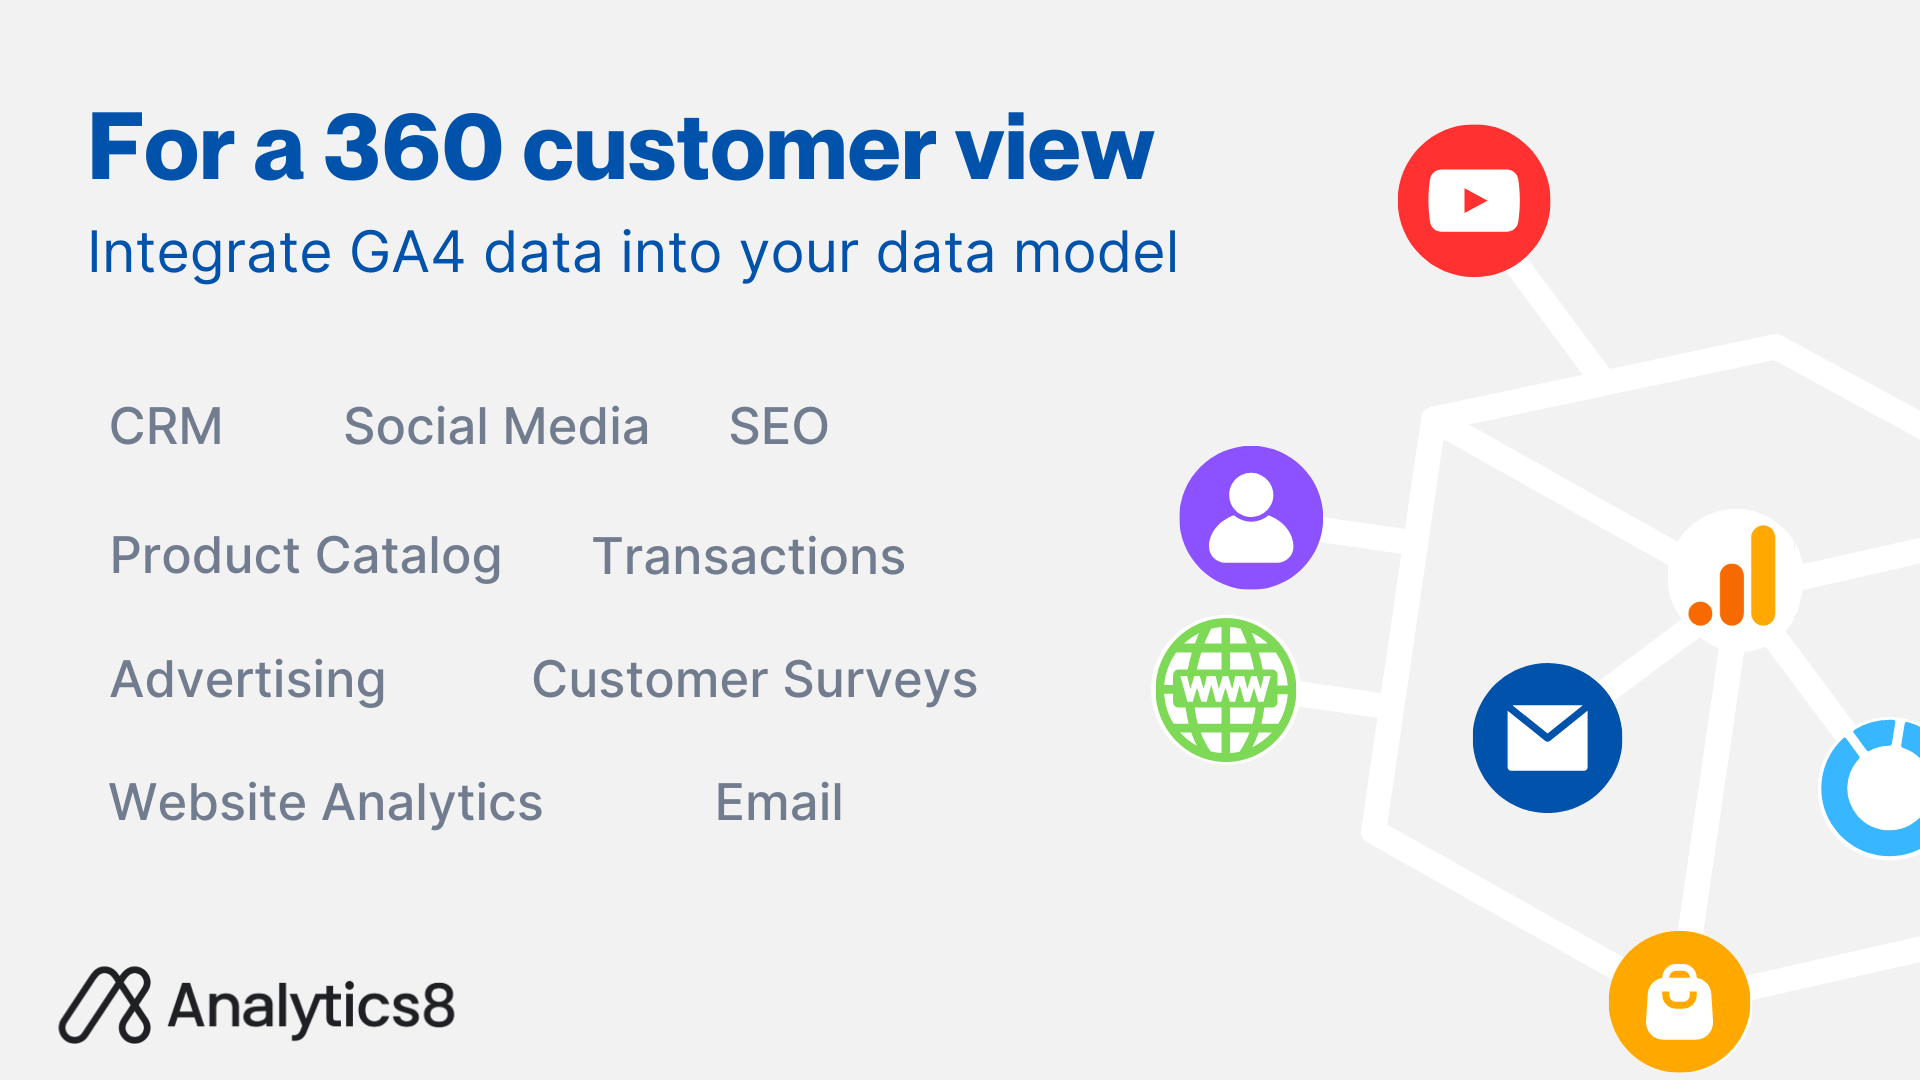 A graphic with three key points depicted in distinct sections: 1. 'Dig into customer needs,' emphasizing the importance of understanding customer behavior and merging multiple data sources. 2. 'Understand your workforce better with ‘people data’,' highlighting the role of analytics in maximizing employee happiness and productivity. 3. 'Use supply chain analytics to identify new revenue streams and market opportunities,' stressing the relevance of real-time data in supply chain decisions.